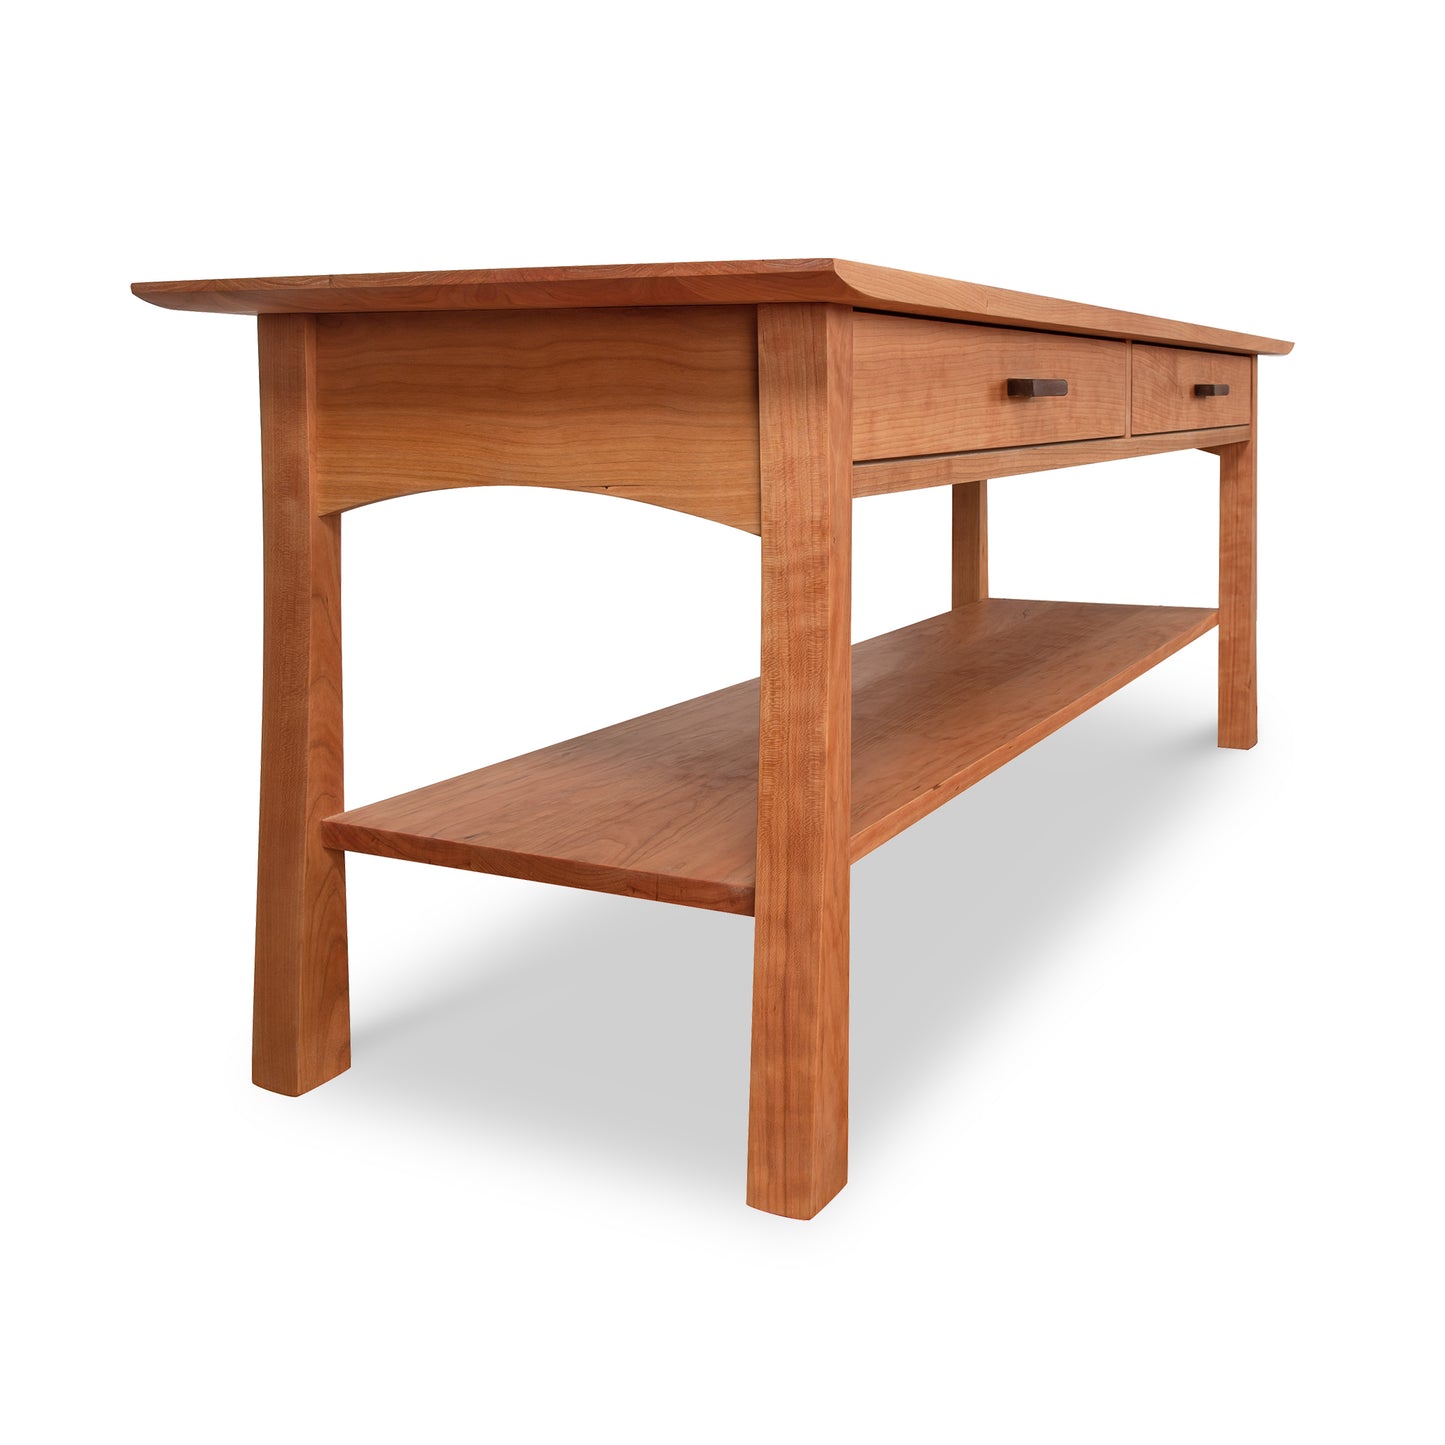 Contemporary Craftsman Console Coffee Table by Vermont Furniture Designs with a single drawer and lower shelf, isolated on a white background, crafted from solid hardwoods with an eco-friendly oil finish.